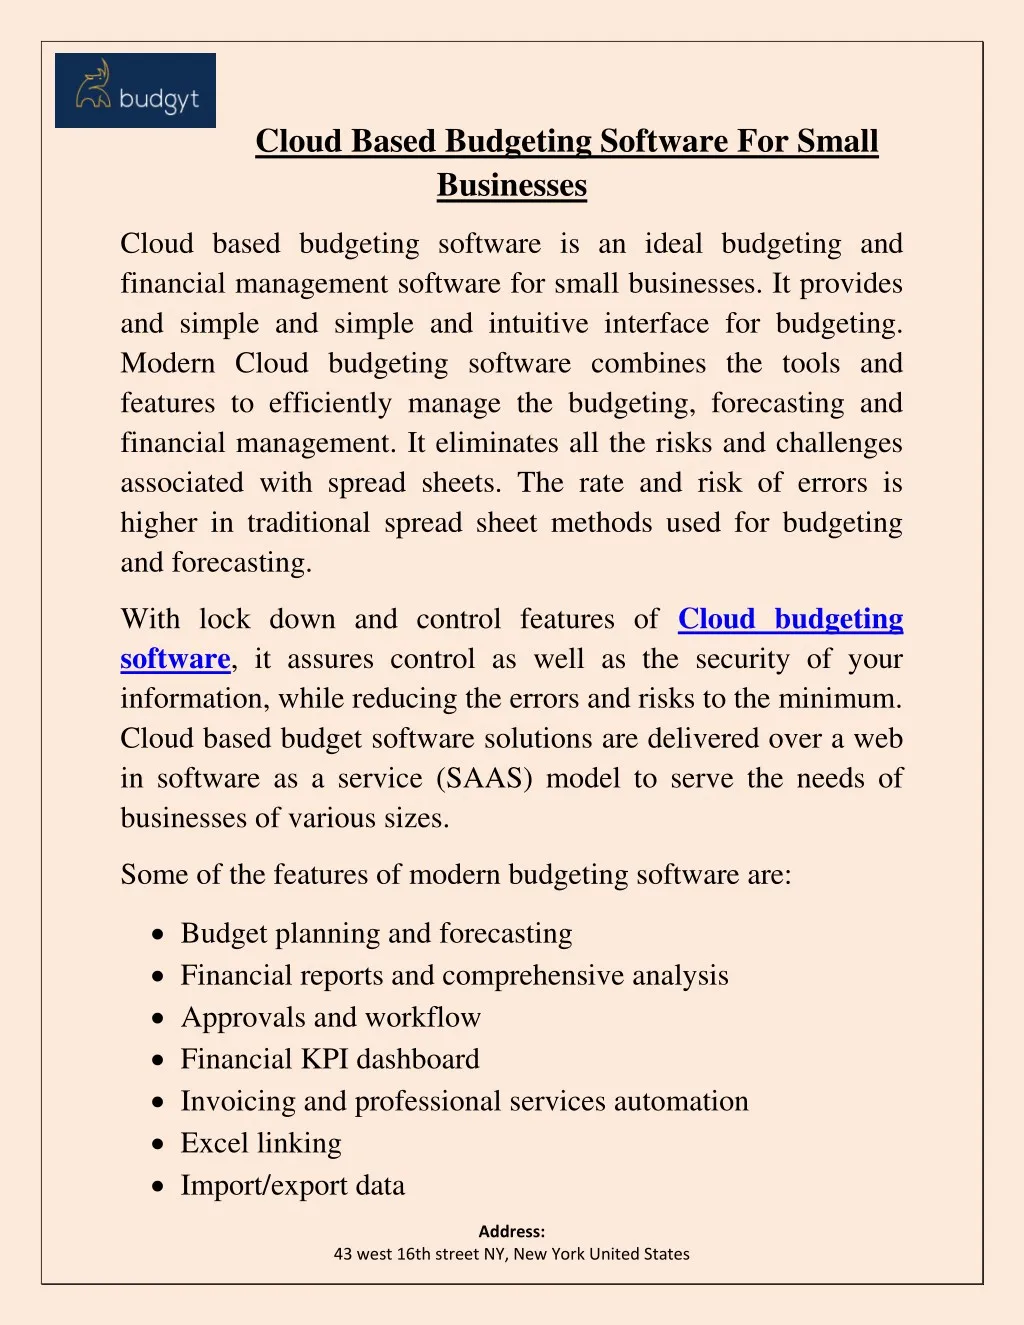 cloud based budgeting software for small